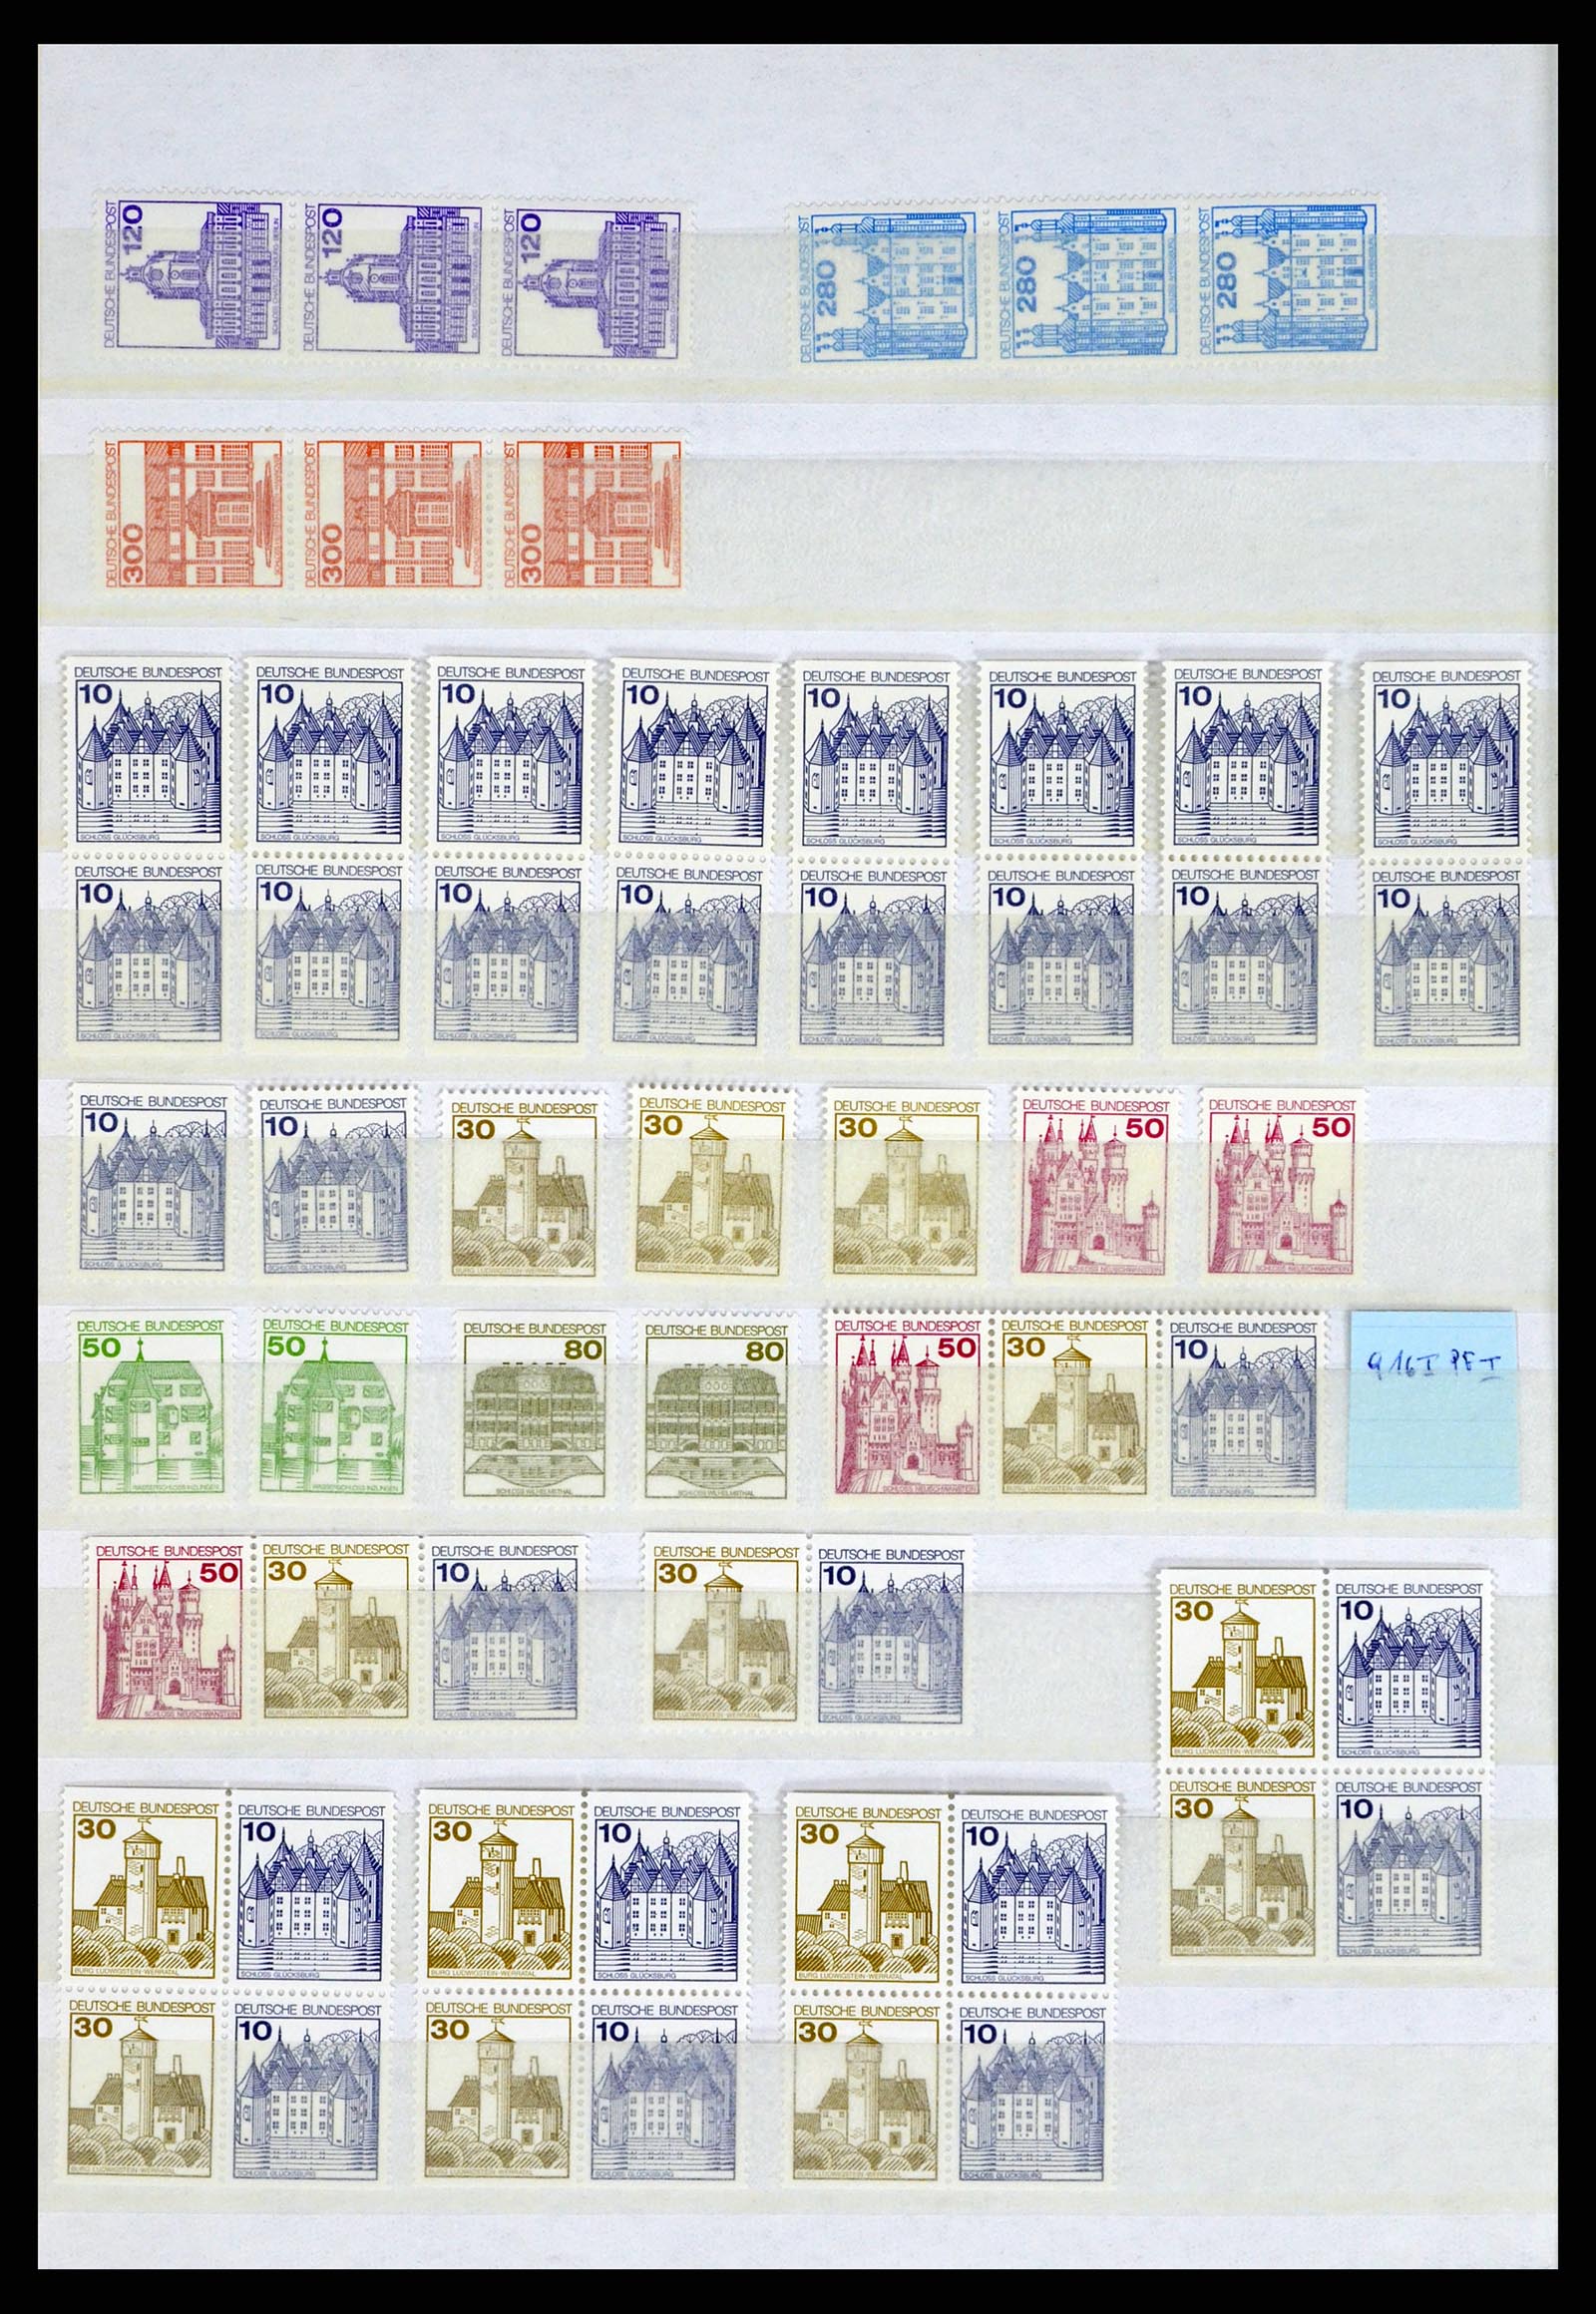 37354 070 - Stamp collection 37354 Bundespost and Berlin 1955-2000.